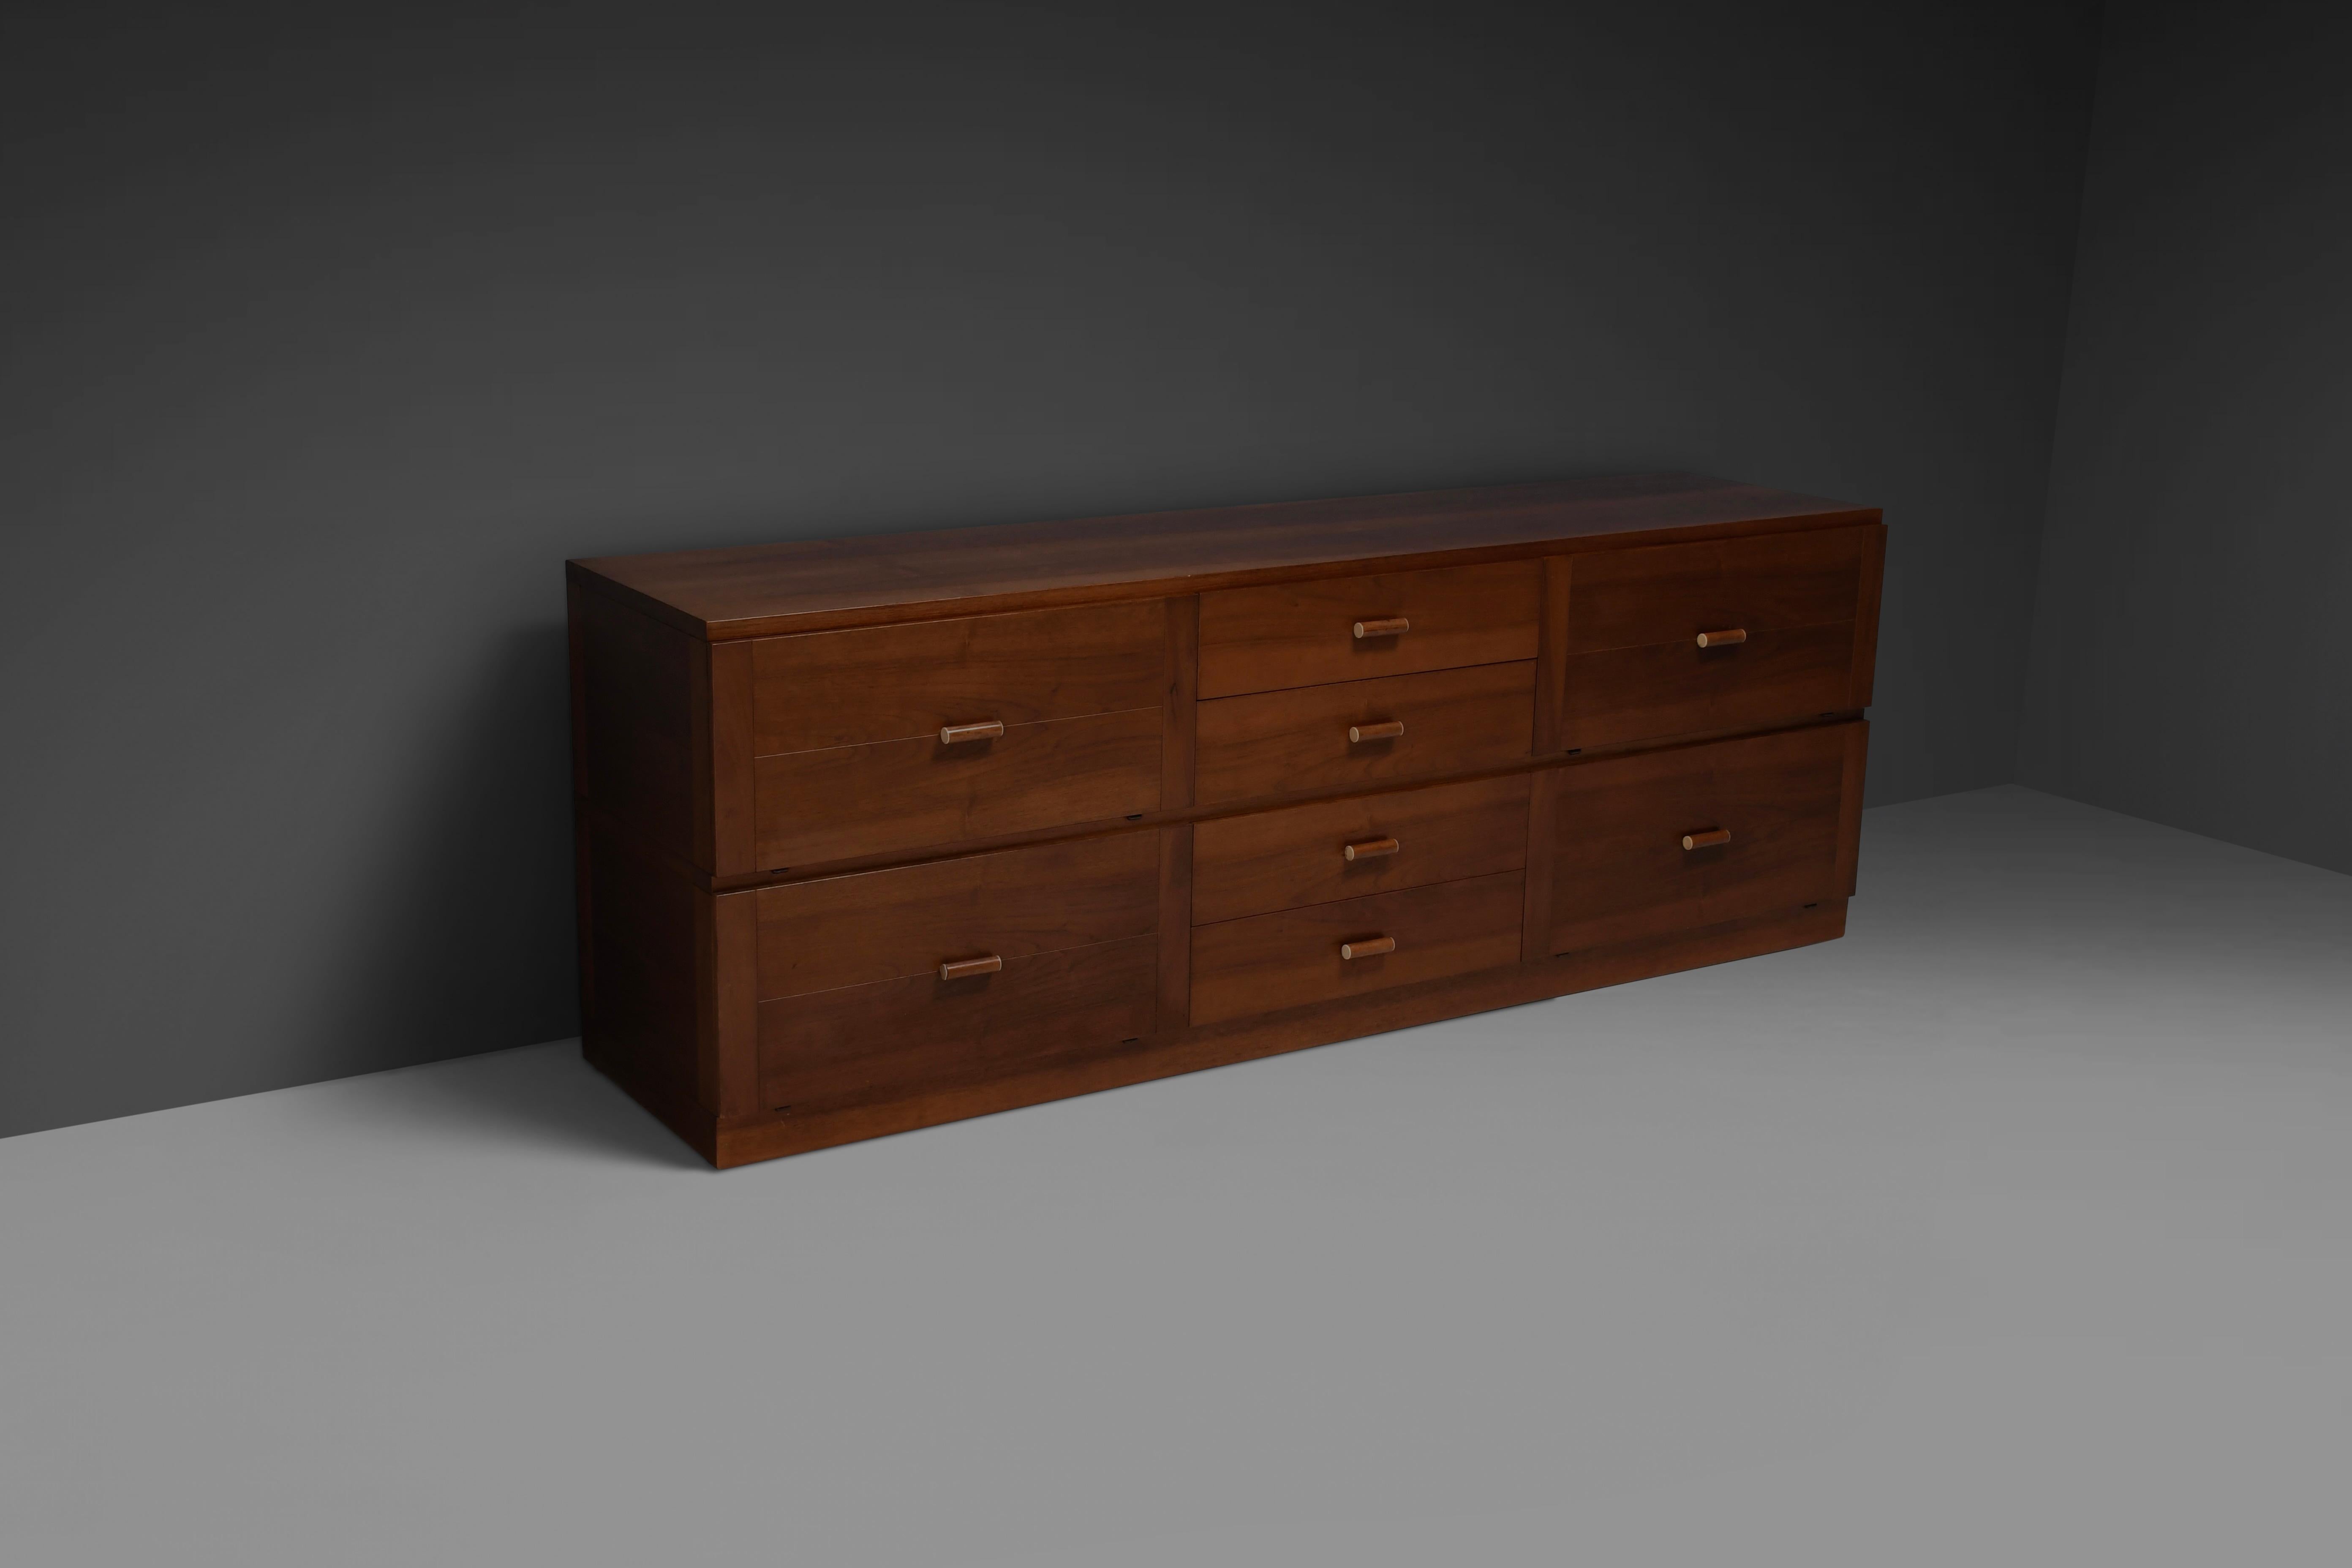 Beautiful minimalistic credenza in very good condition.

Designed by architect Antonio Virgilio in the 1970s 

Manufactured by Bernini Italy.

The sideboard is made from massive walnut and walnut veneer and has white accents on the round handles, it